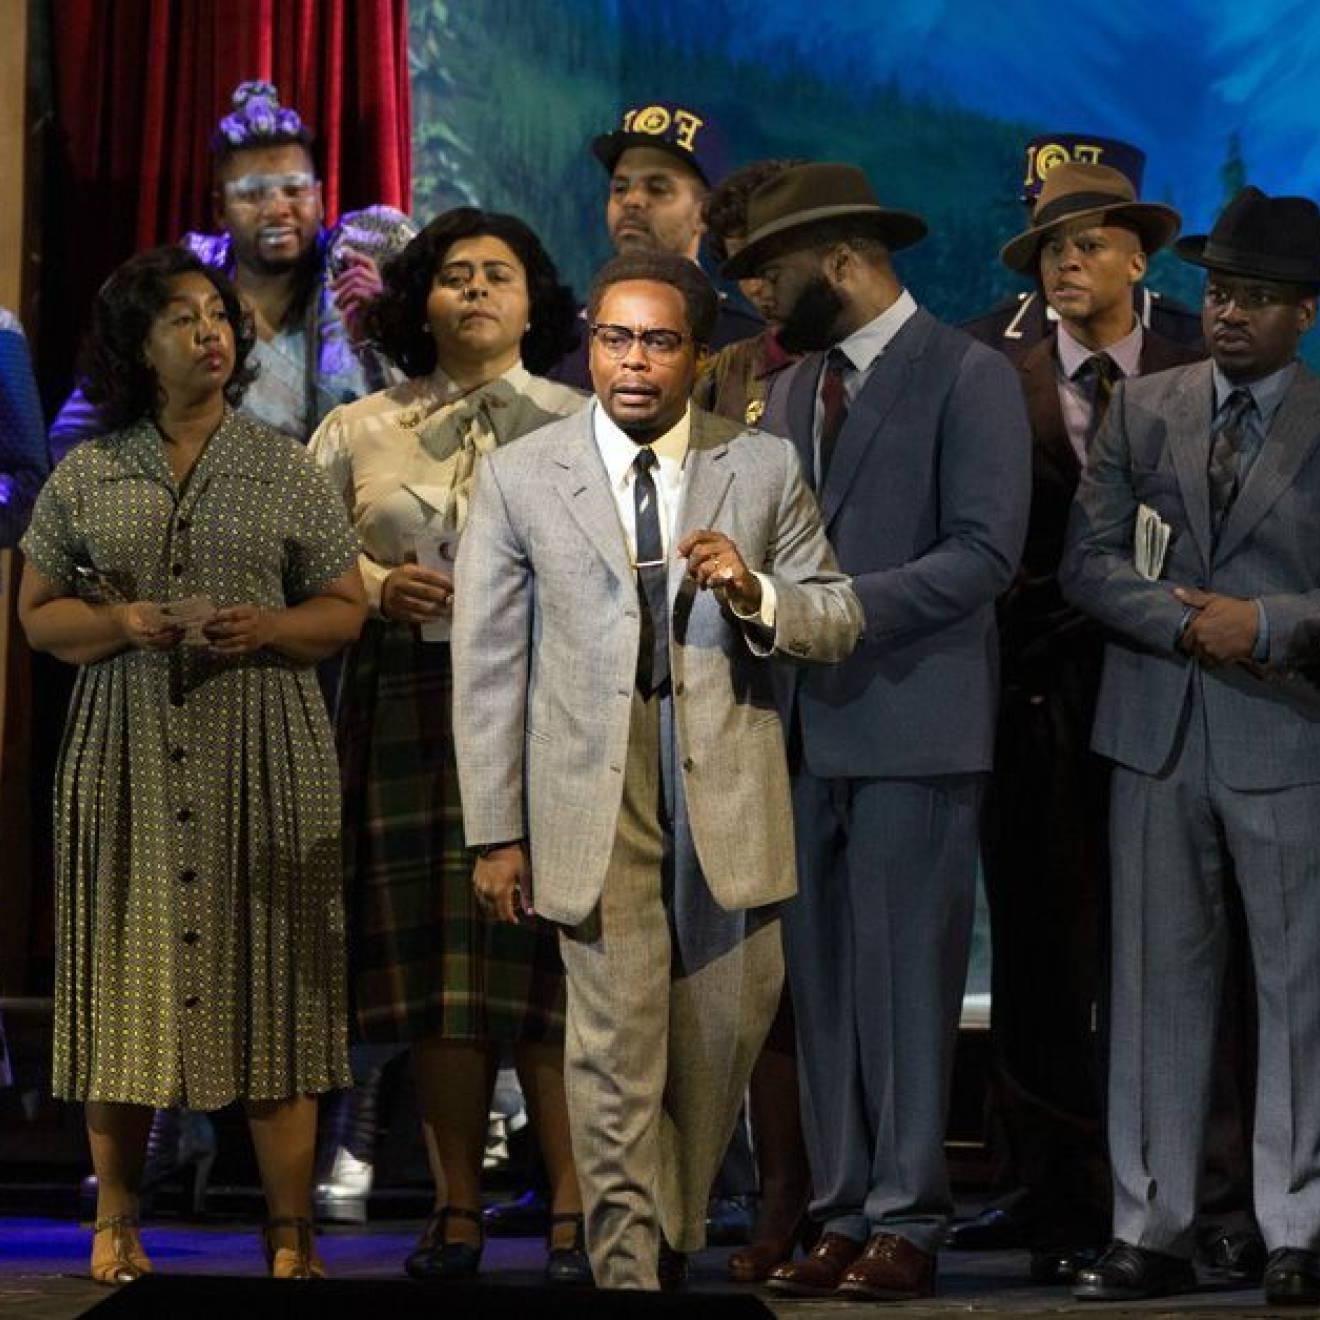 The cast of "X: The Life and Times of Malcolm X" on stage at the Metropolitan Opera, 50年代的服装